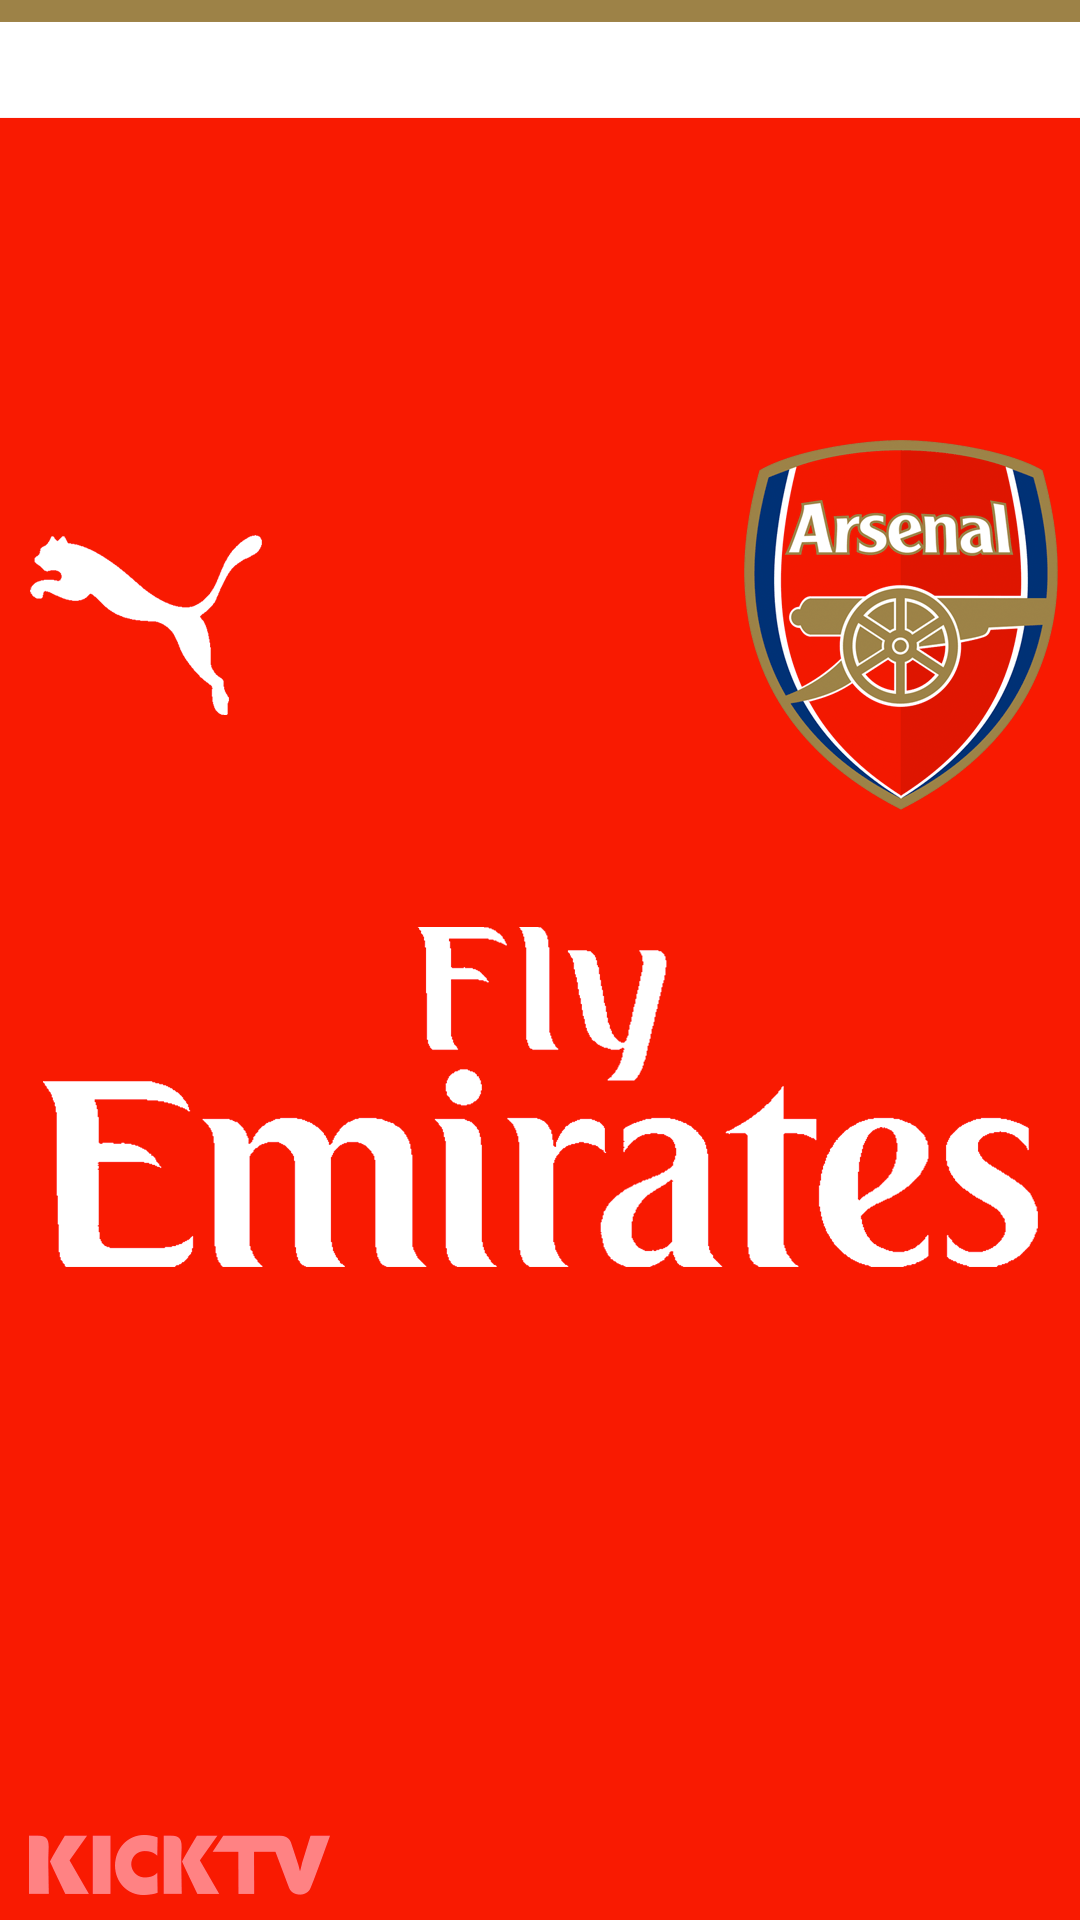 Arsenal iPhone Wallpapers - Top Free Arsenal iPhone Backgrounds